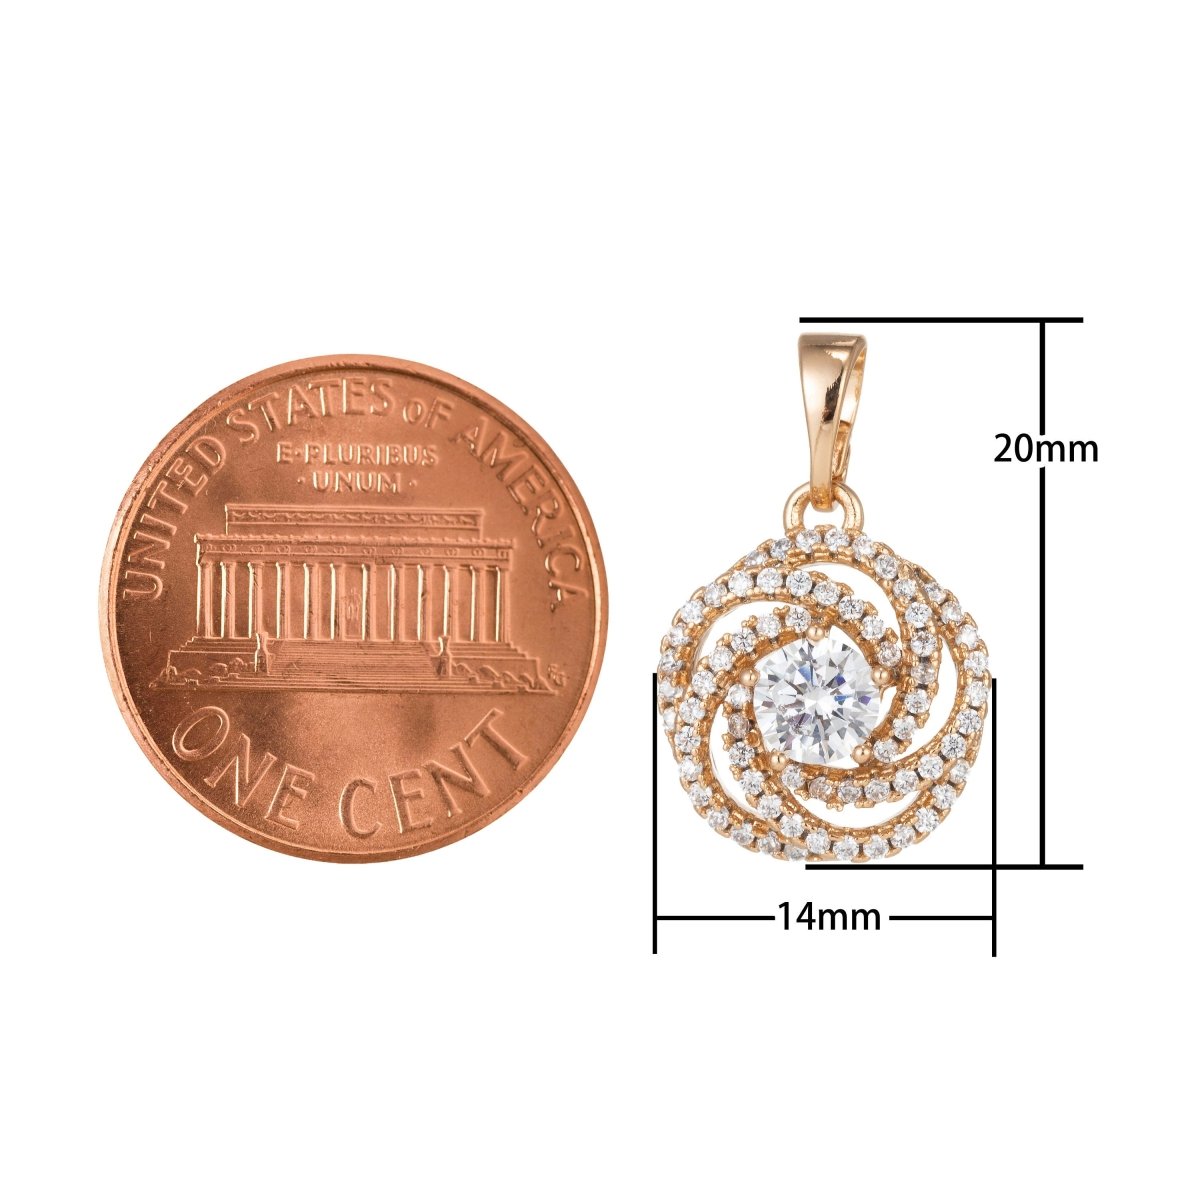 18k Gold Filled Micro Pave CZ Flower Pendant Charm, Micro Pave CZ Geometric Pendant Charm, Gold Filled Pendant, For DIY Jewelry I-528 - DLUXCA